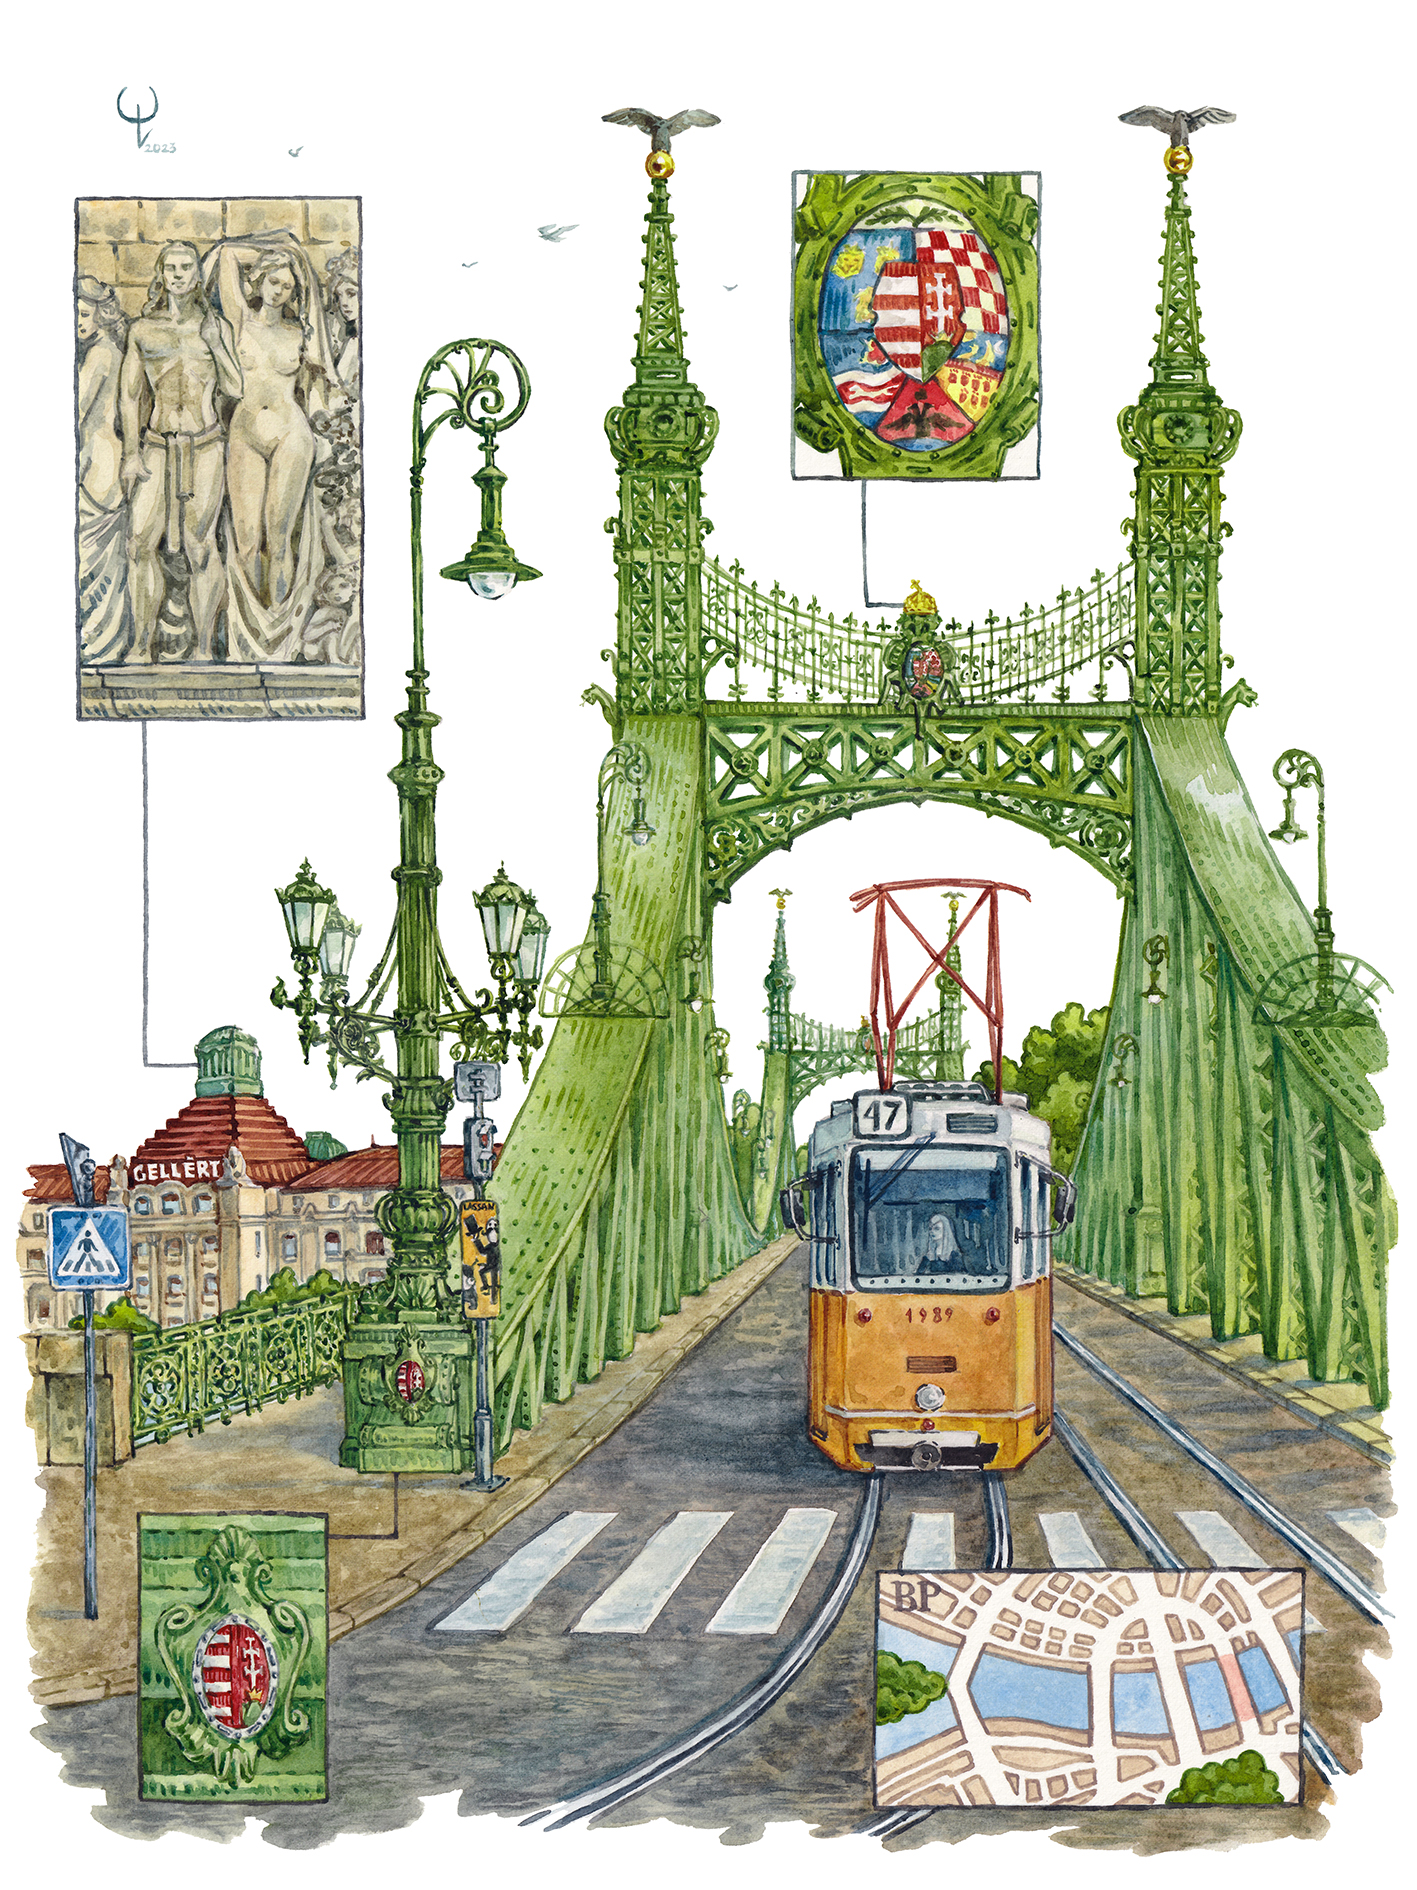 Watercolor (watercolour) painting of Liberty bridge in Budapest.